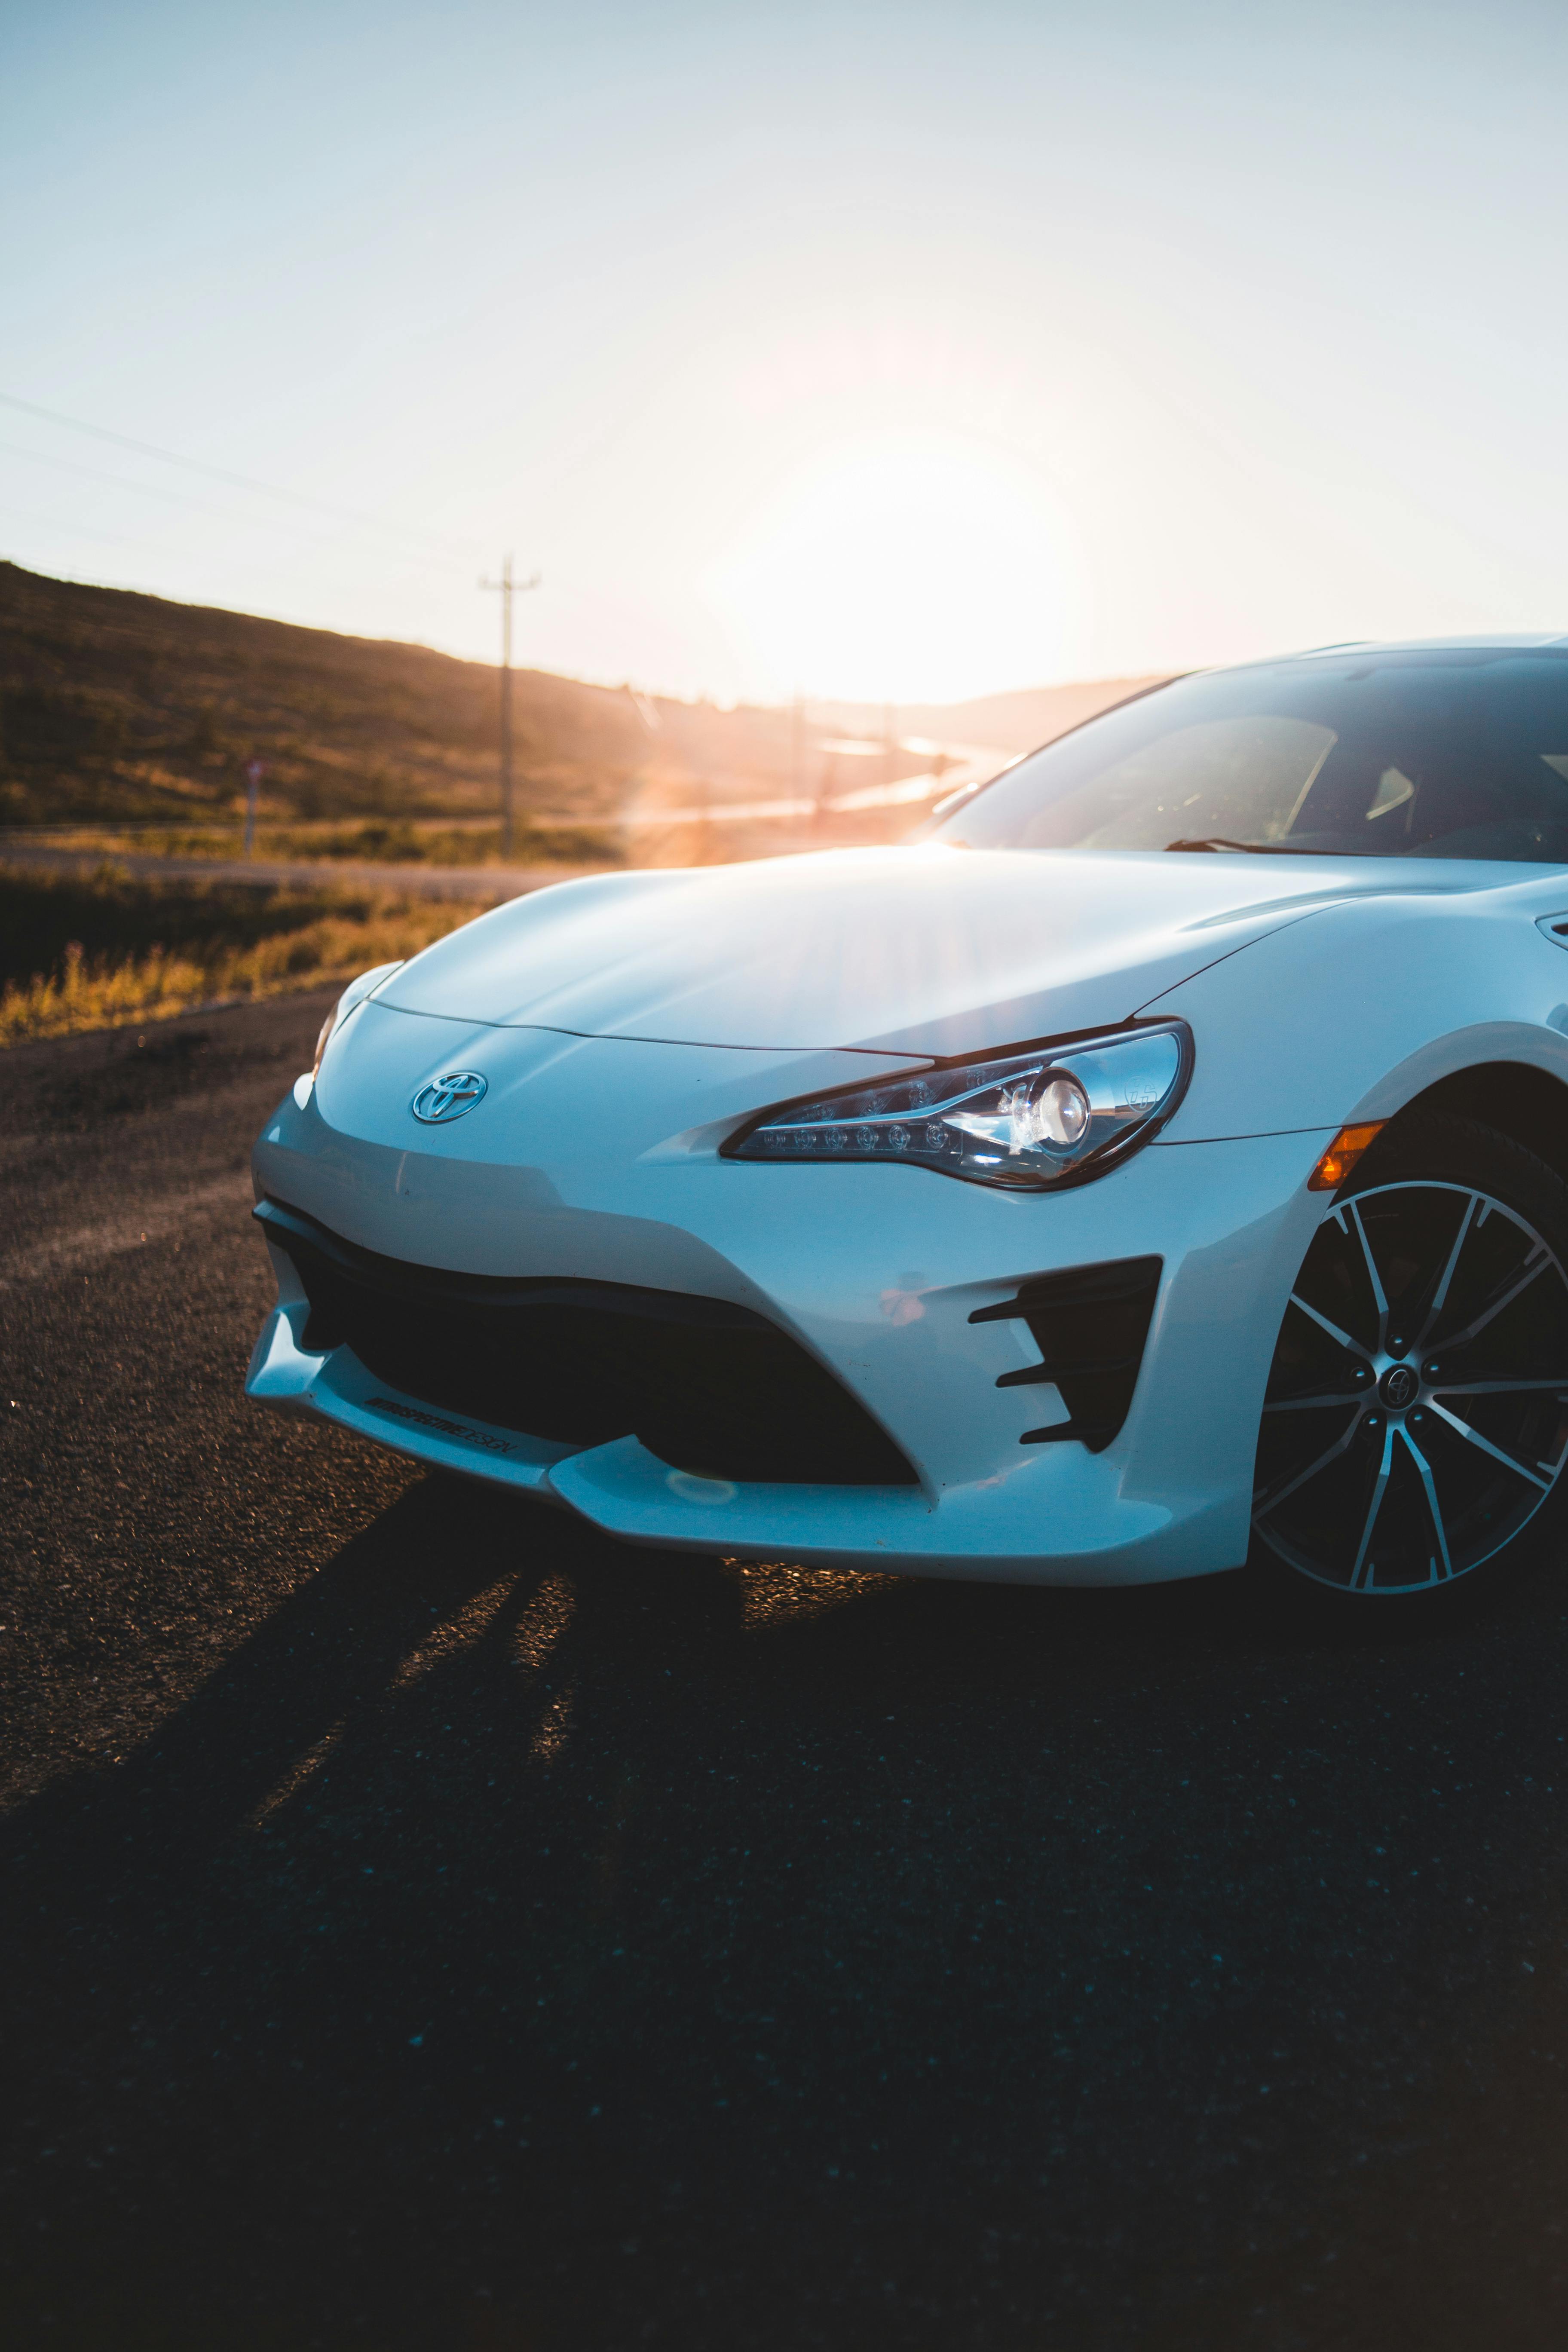 The sun setting while a car drives by | Source: Pexels